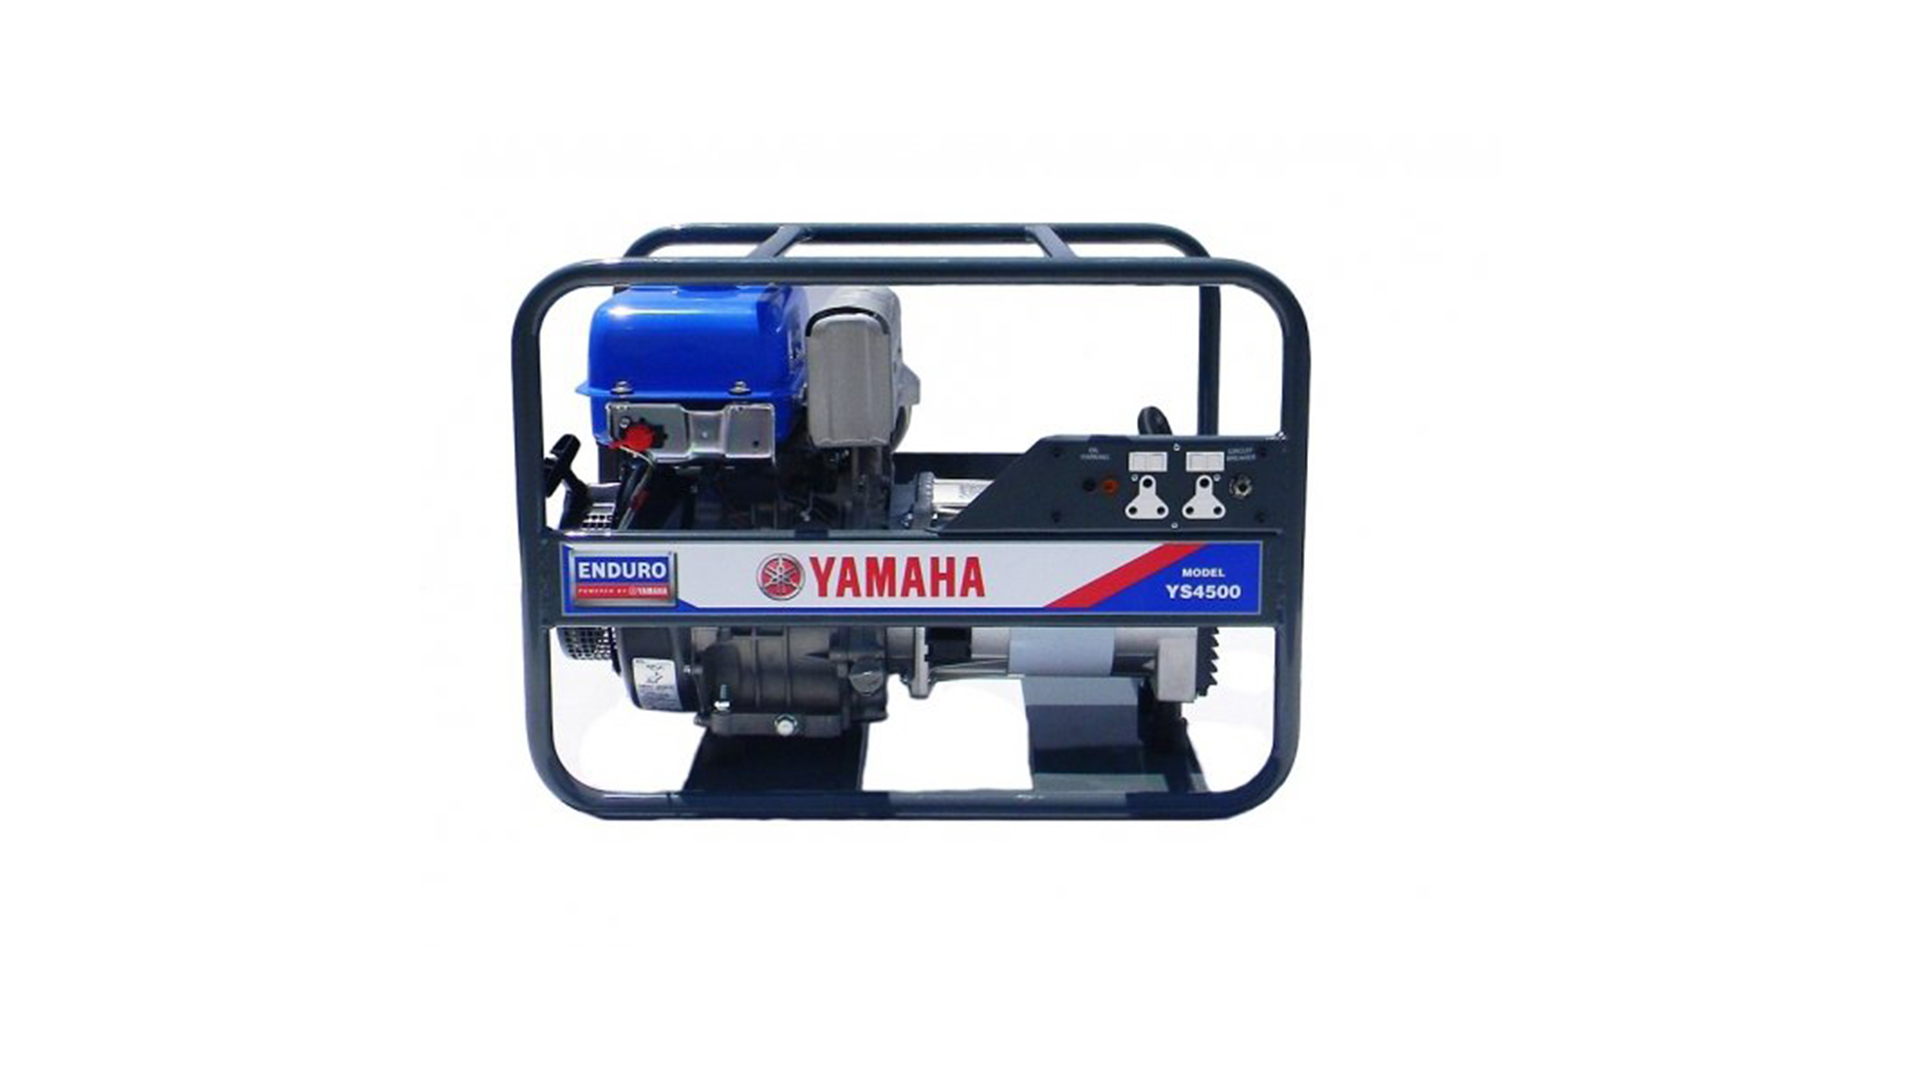 YAMAHA YS2600 GENERATOR  - CONTRACTORS COMPACT:
This max rate AC 2 to 2.3Kva petrol driven generator is compact and high-power with low-fuel consumption. Powered by Yamaha’s 5.5hp engine and complimented with a 2,2Kva Sincro® alternator. Suitable for running power tools and lights.